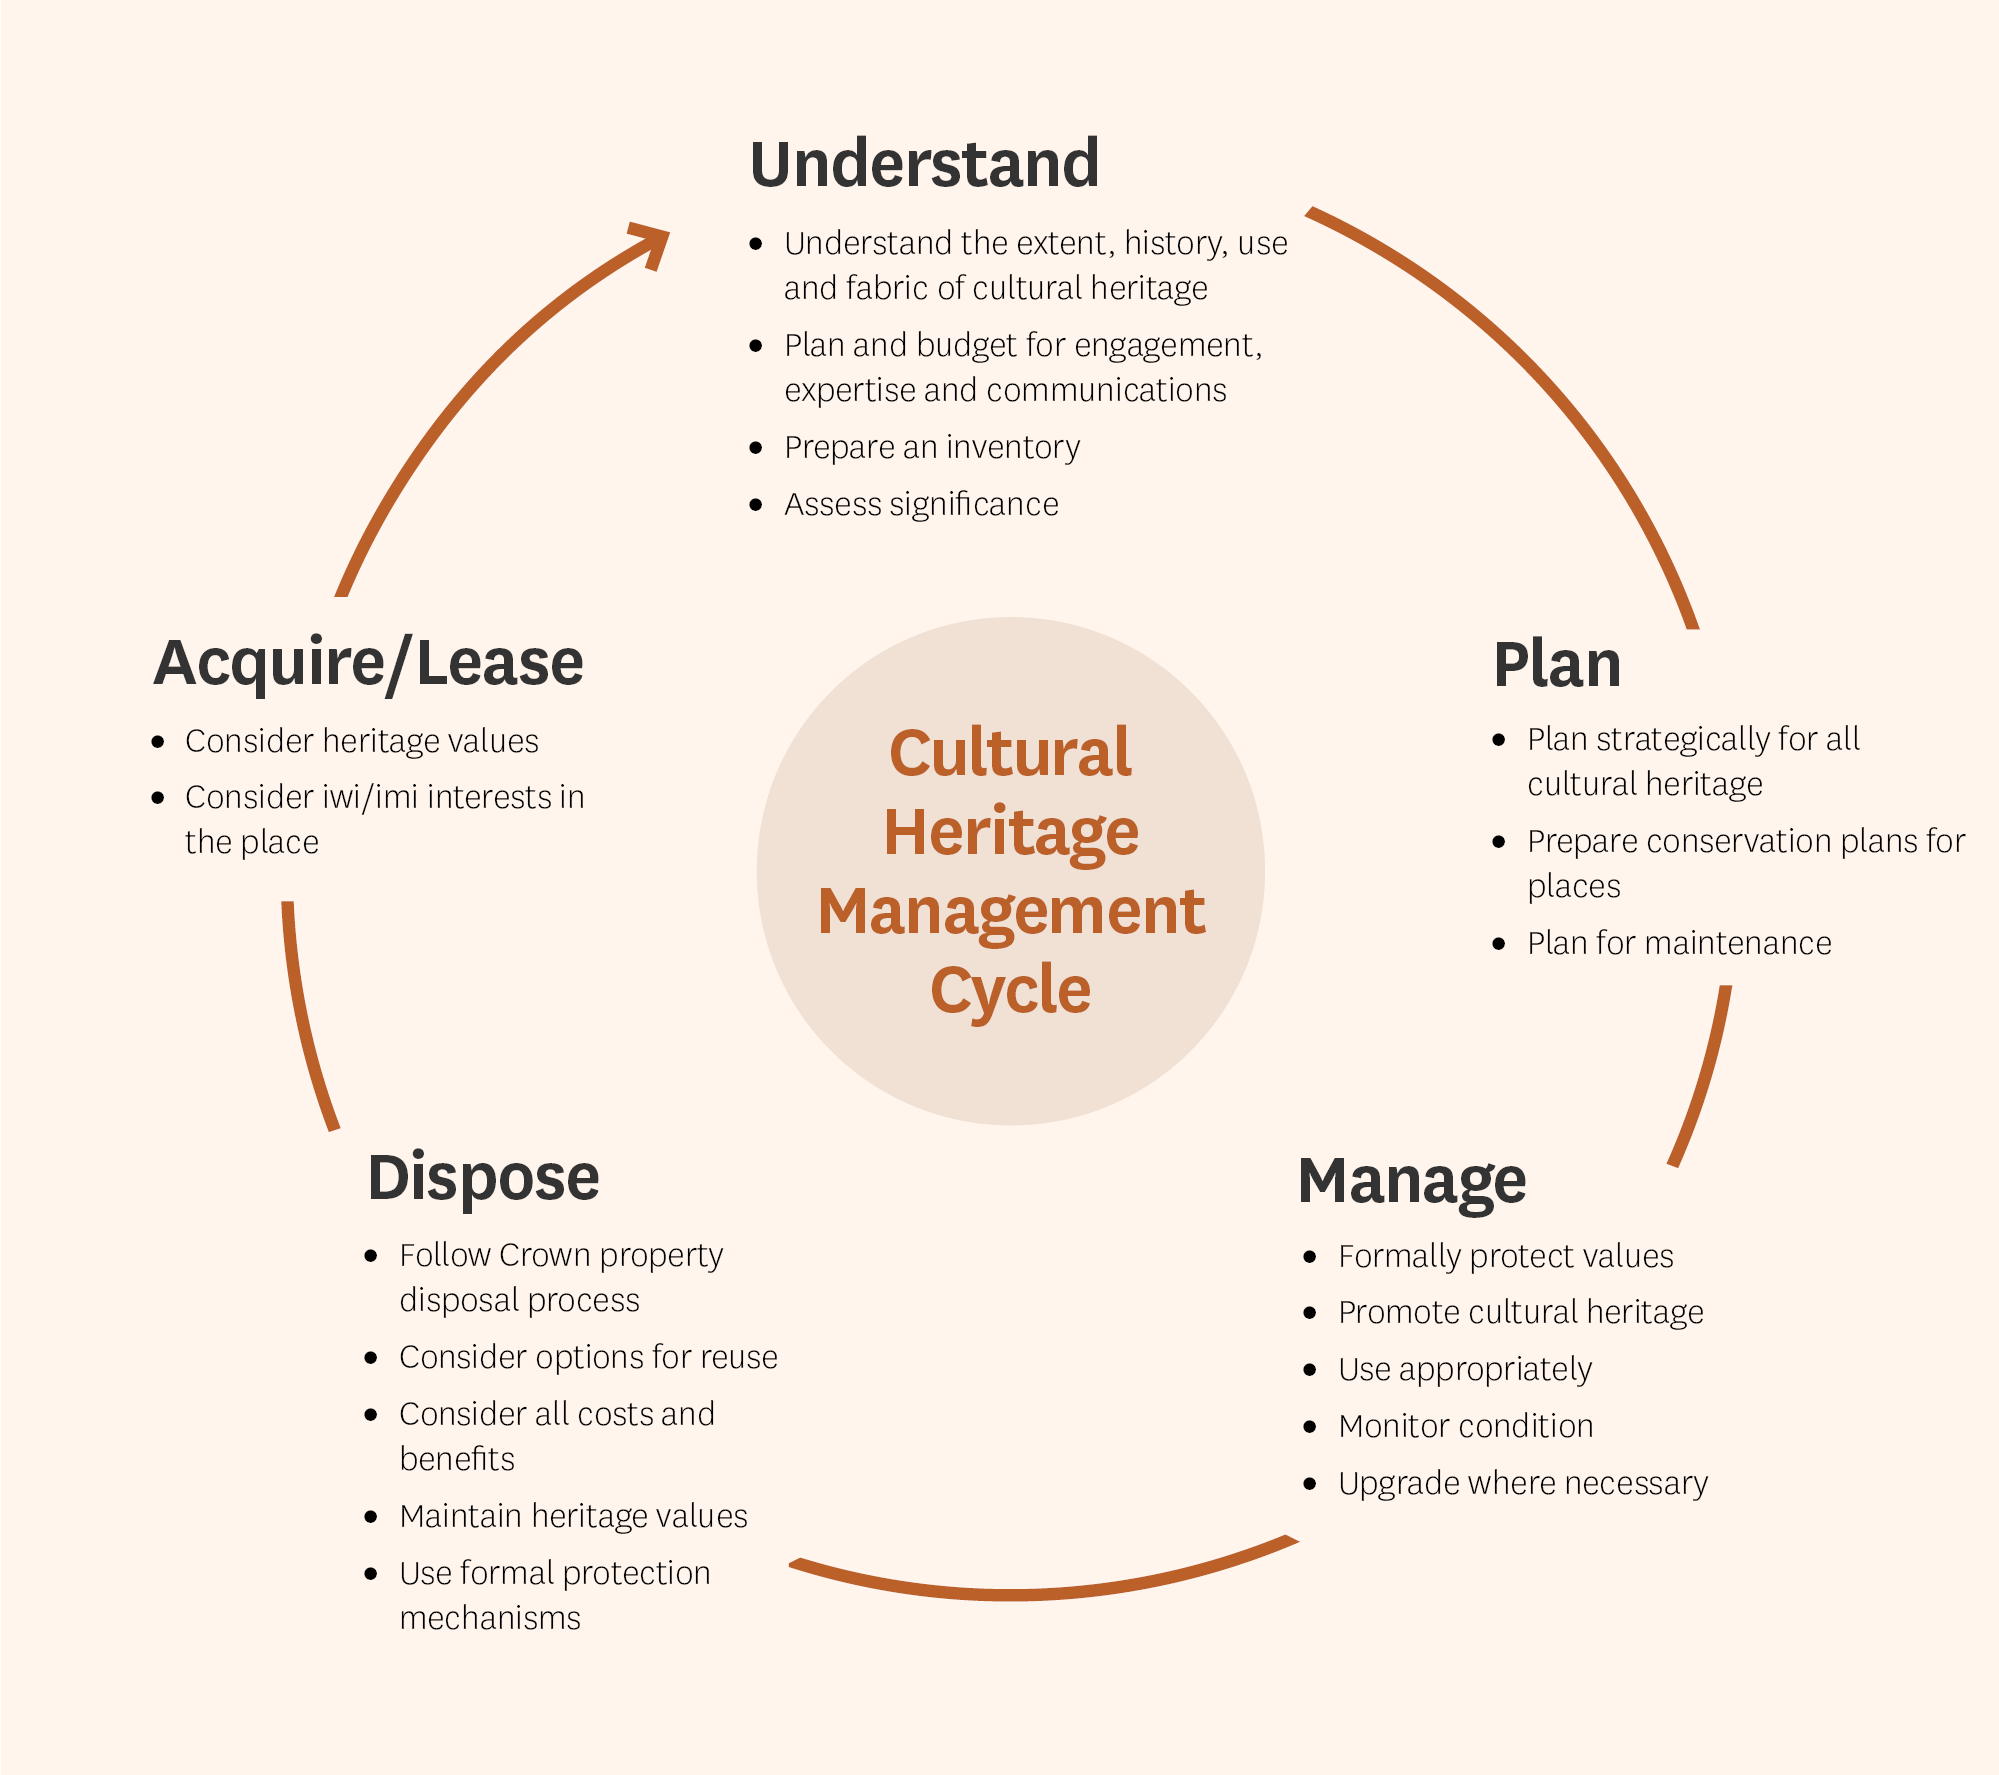 Cultural Heritage Management Cycle starting with Understand and moving around to Plan, Manage, Dispose and Acquire/Lease then back to Understand